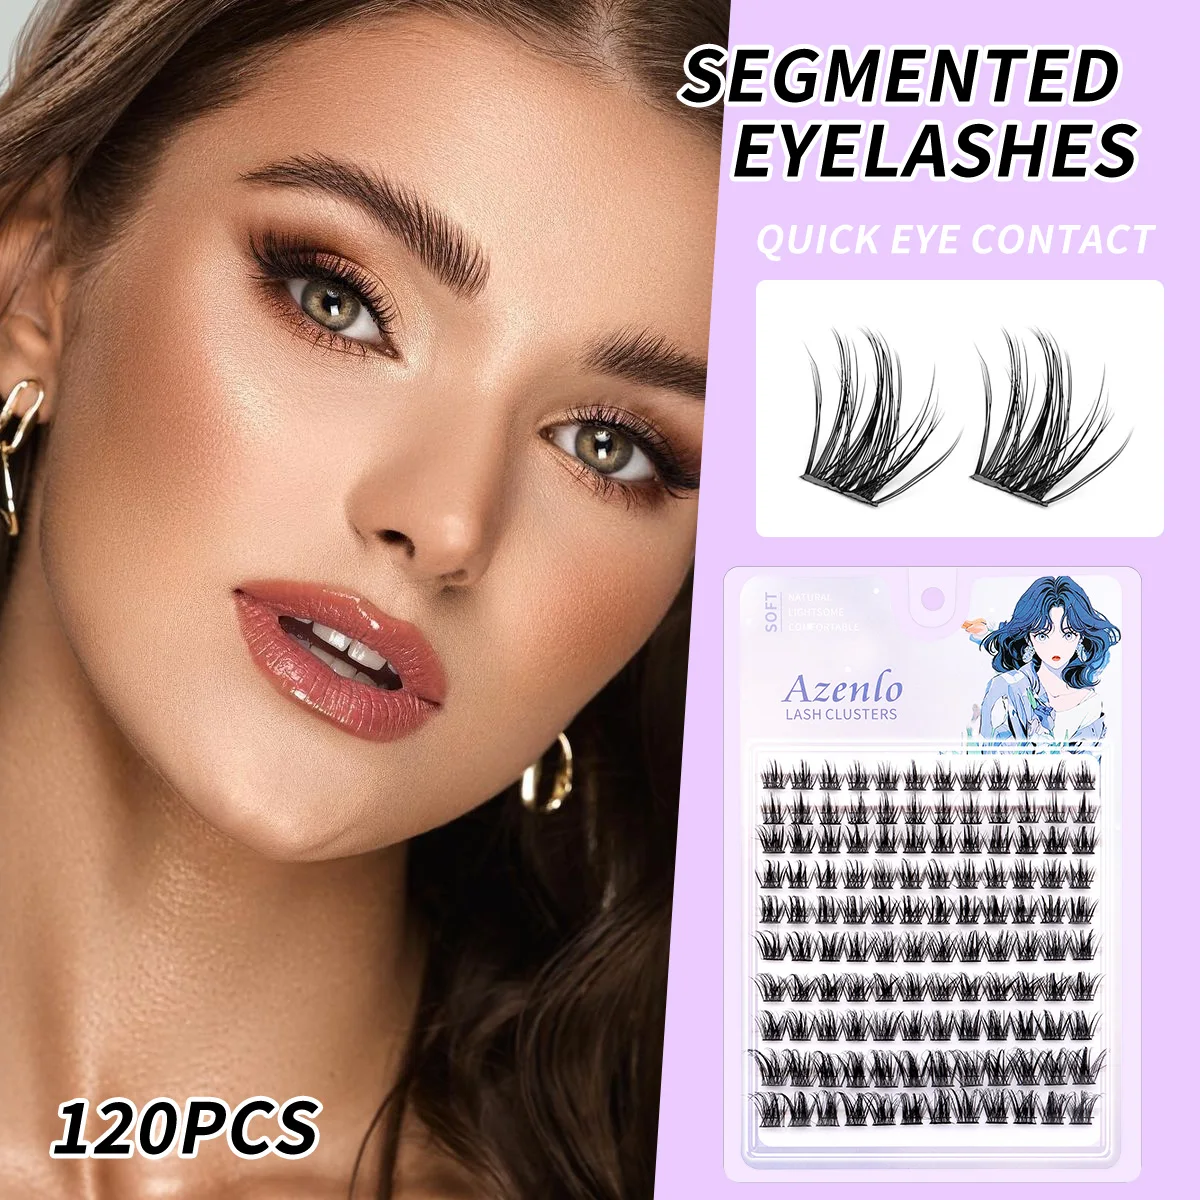 

120pcs Individual False Eyeashes DIY Cluster Lashes Wispy Fluffy Thin Band Wide Stem Lash Clusters Lash Extension 07-H-02 Makeup